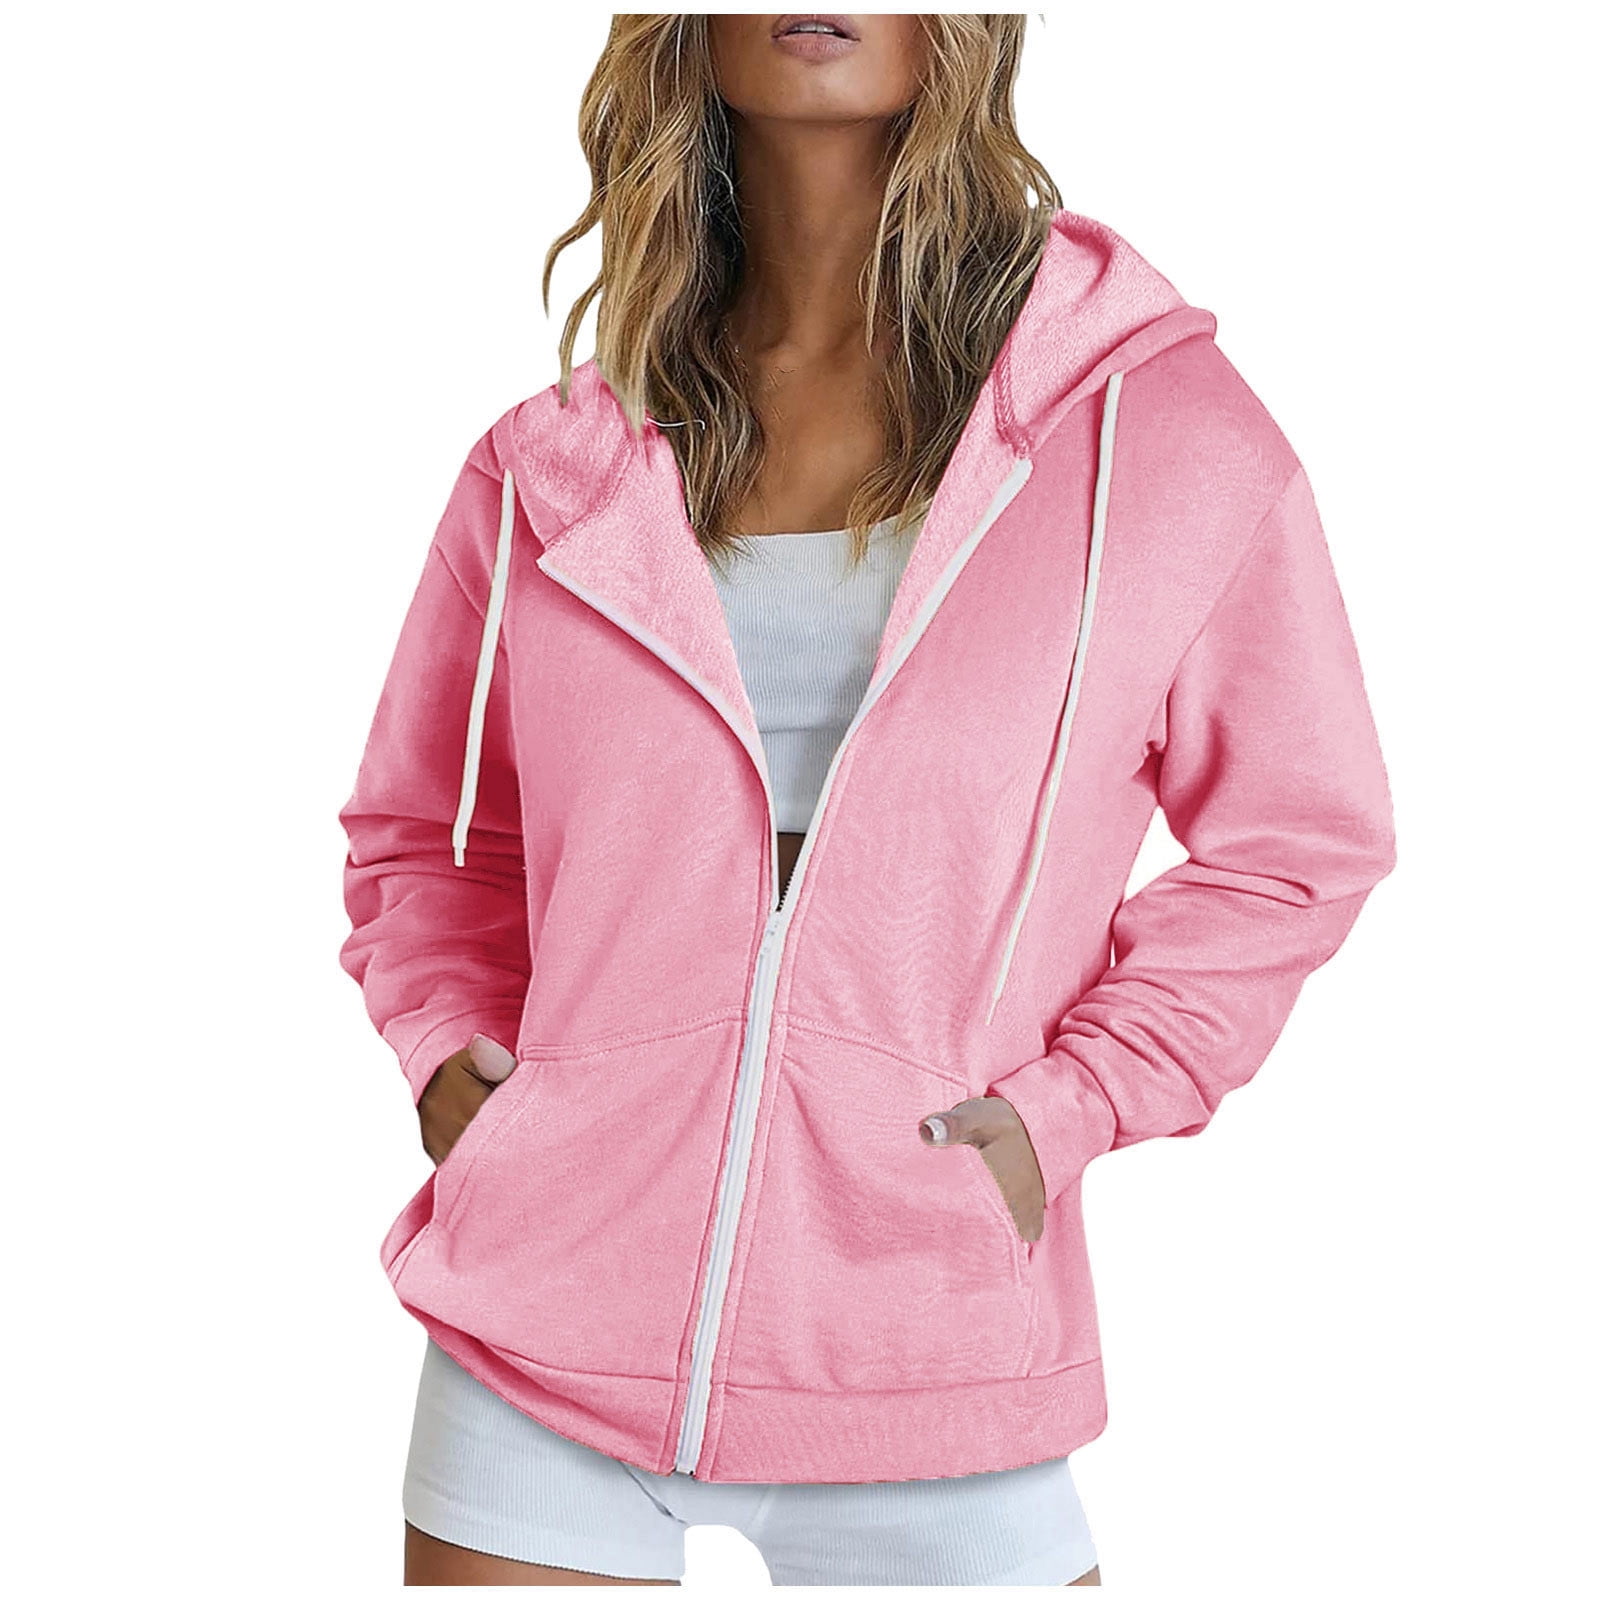 Full Zip-up Jackets with Pockets for Women Cotton Fleece Plain Hoodie ...